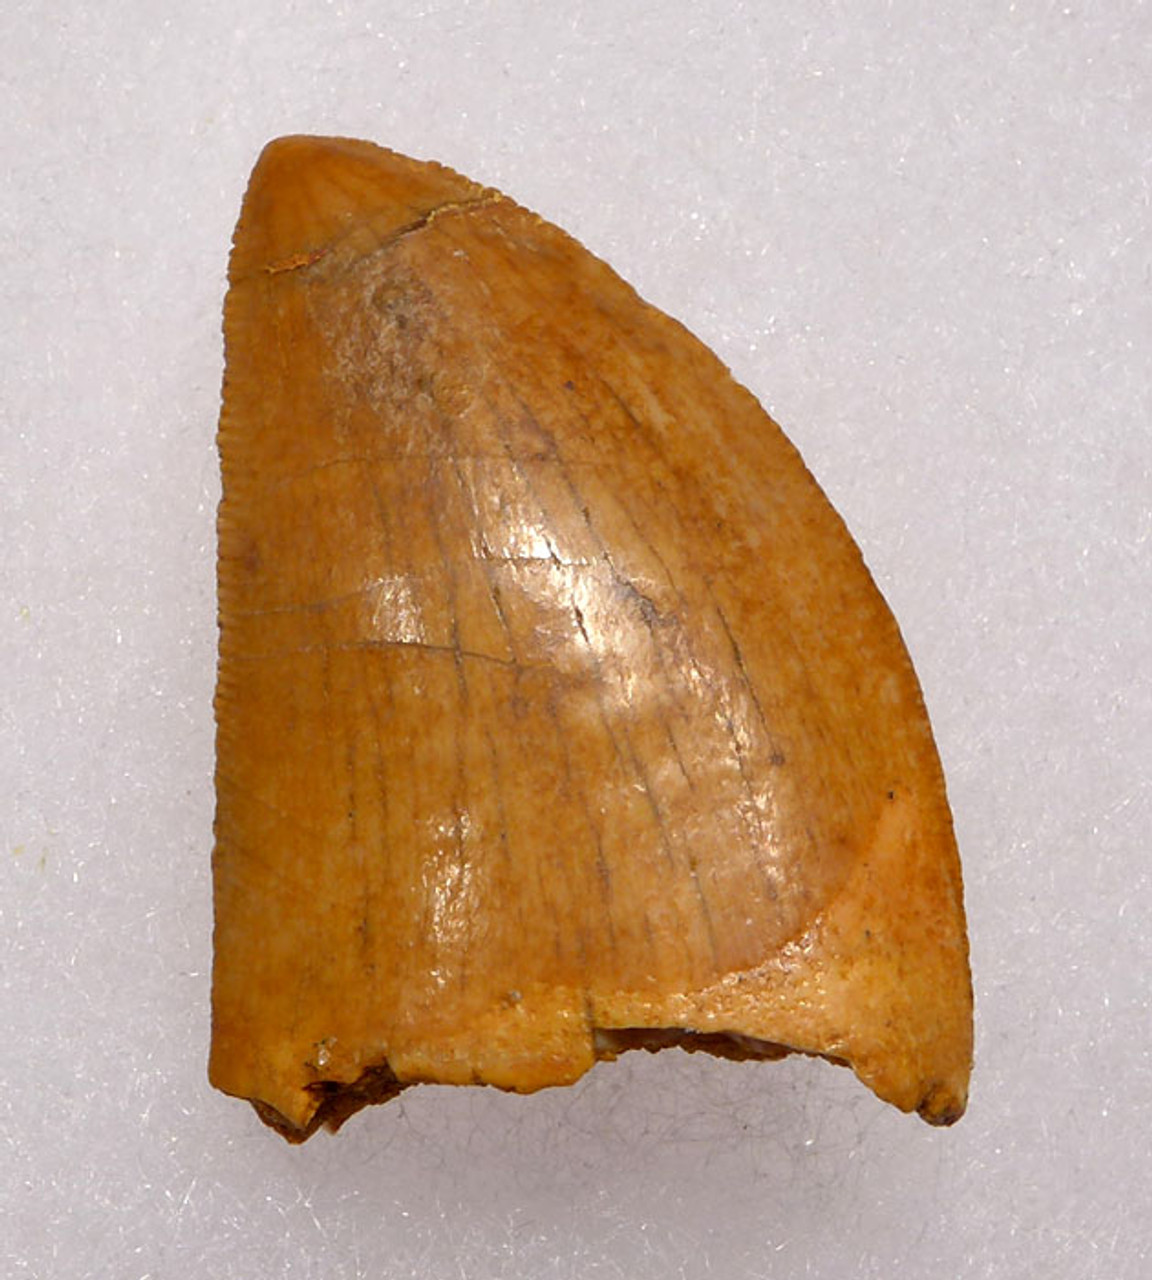 DT2-080 - UNBROKEN CARCHARODONTOSAURUS FOSSIL TOOTH FROM THE LARGEST MEAT-EATING DINOSAUR